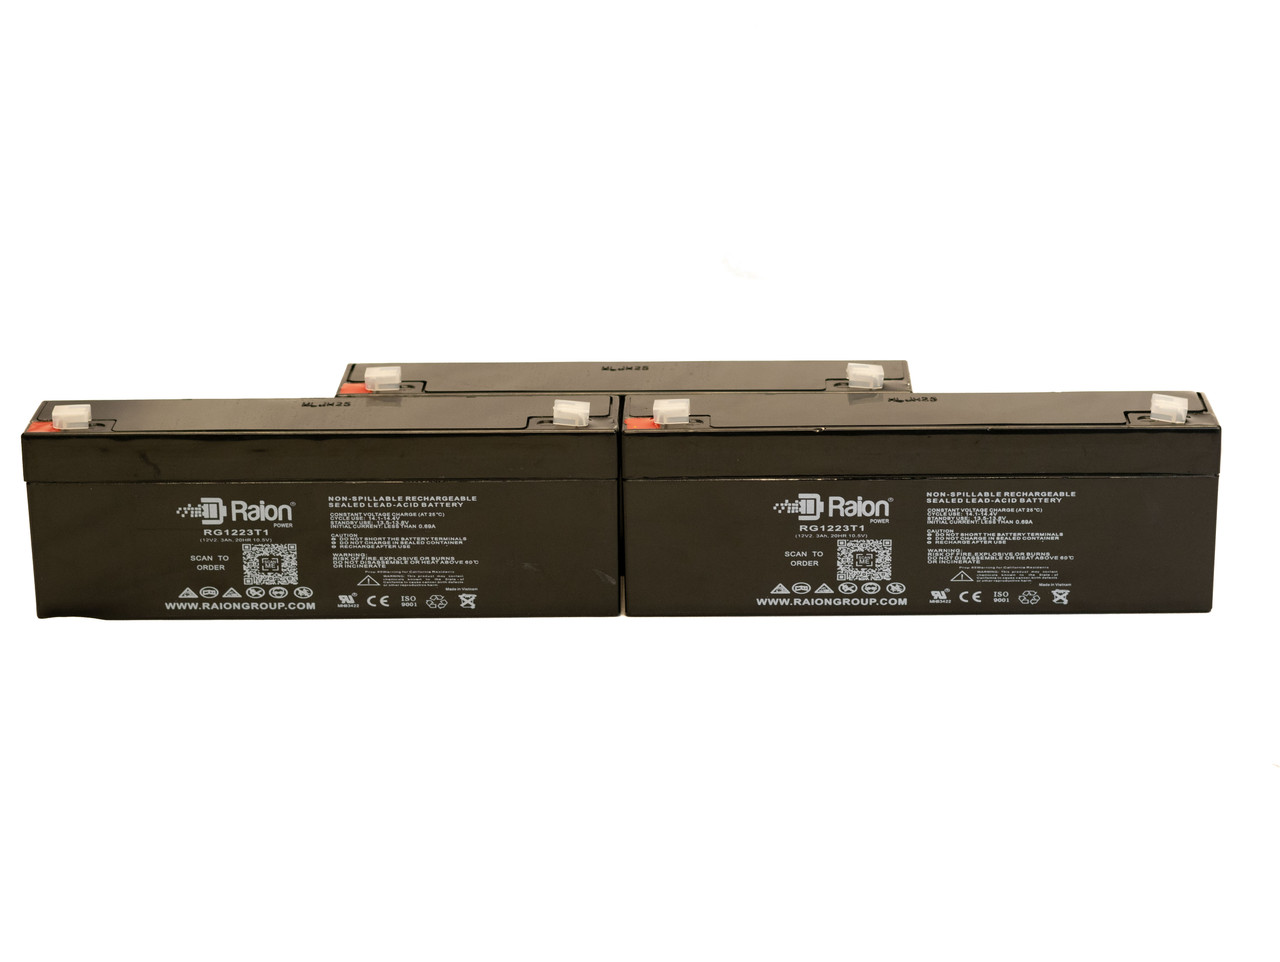 Raion Power 12V 2.3Ah RG1223T1 Replacement Medical Battery for B Braun 620-200 - 3 Pack